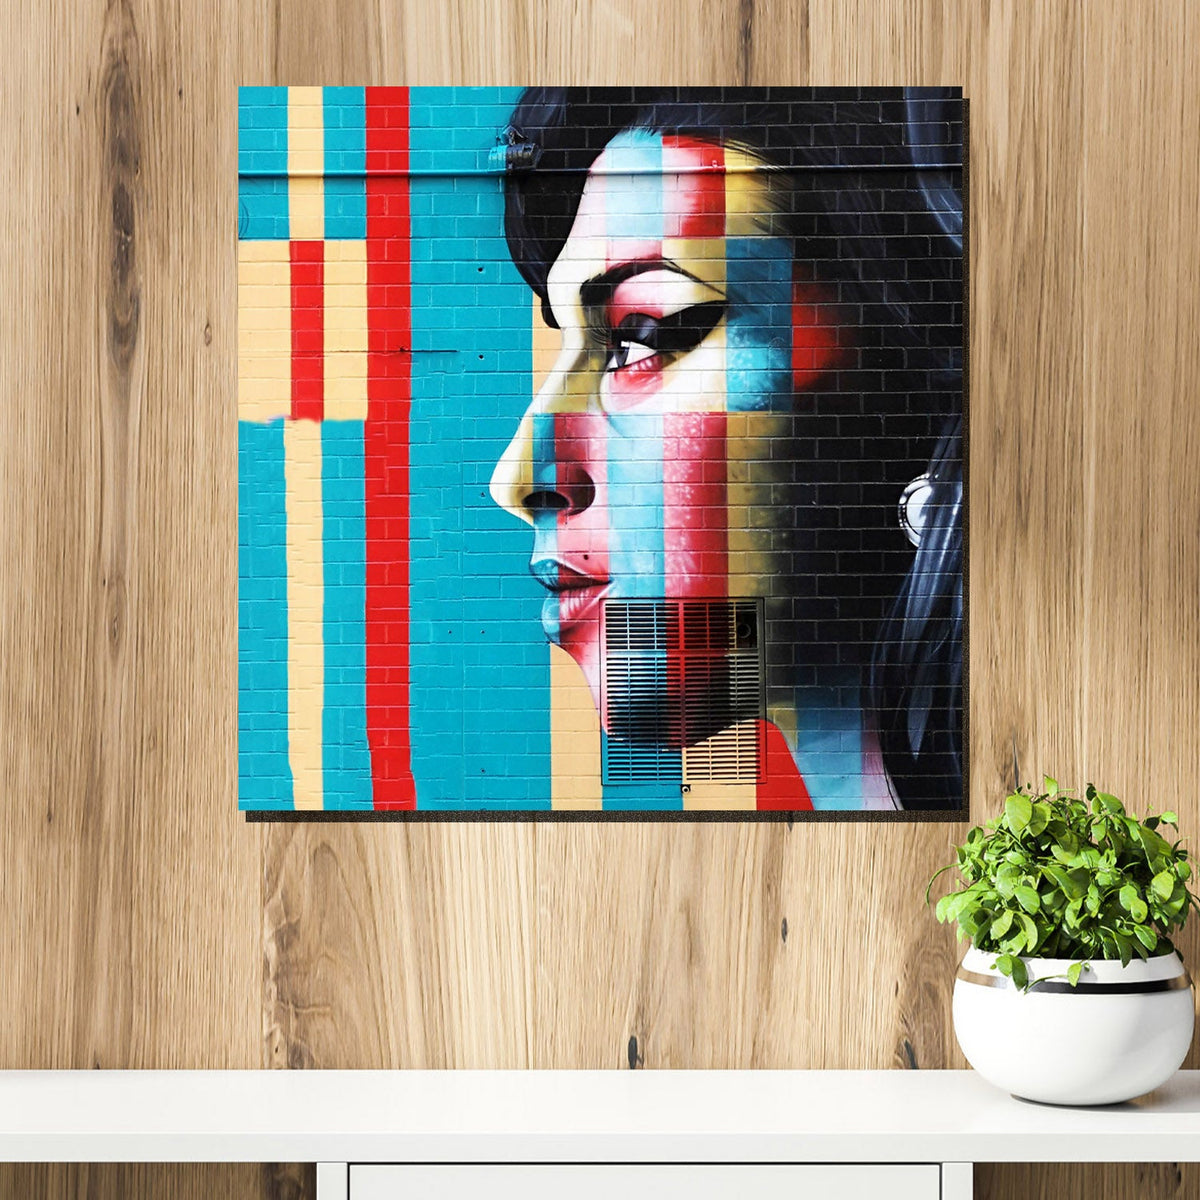 https://cdn.shopify.com/s/files/1/0387/9986/8044/products/AmyWineHouseCanvasArtPrintStretched-2.jpg